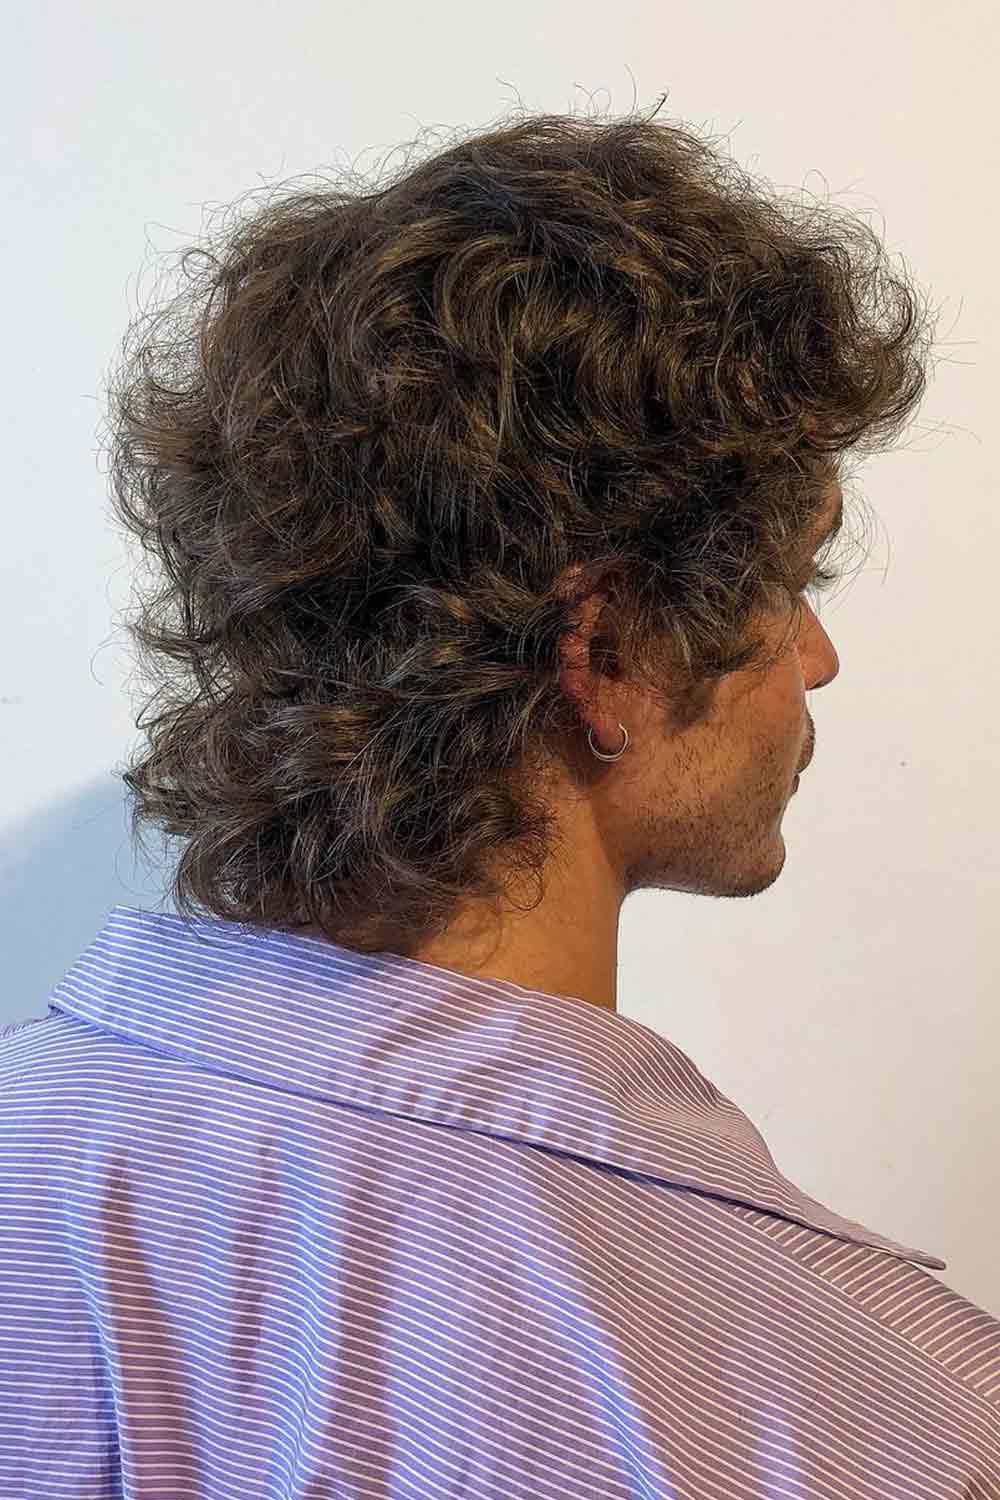 Shaggy Mullet Hairstyle for Men